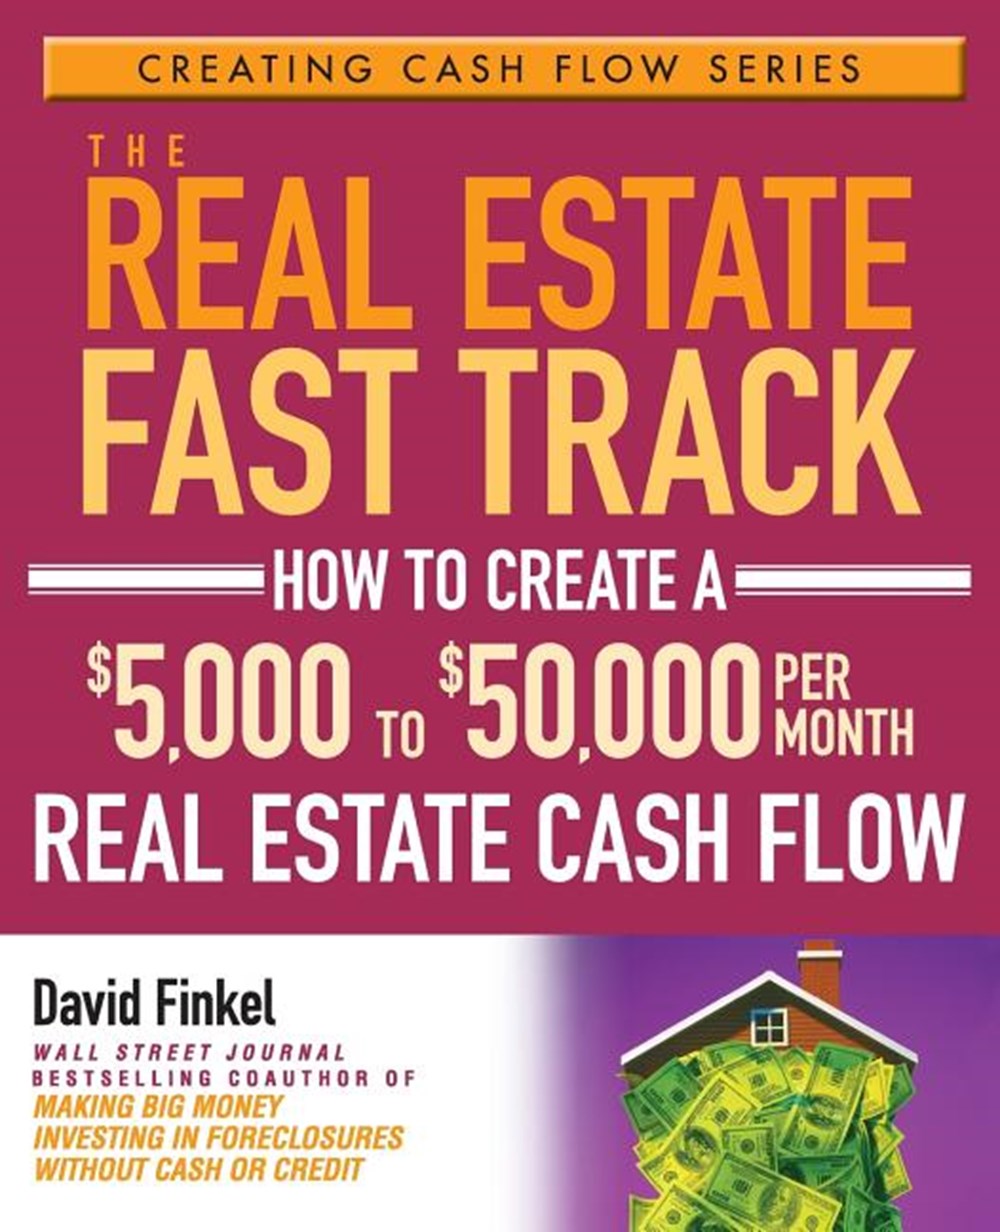 Real Estate Fast Track: How to Create a $5,000 to $50,000 Per Month Real Estate Cash Flow